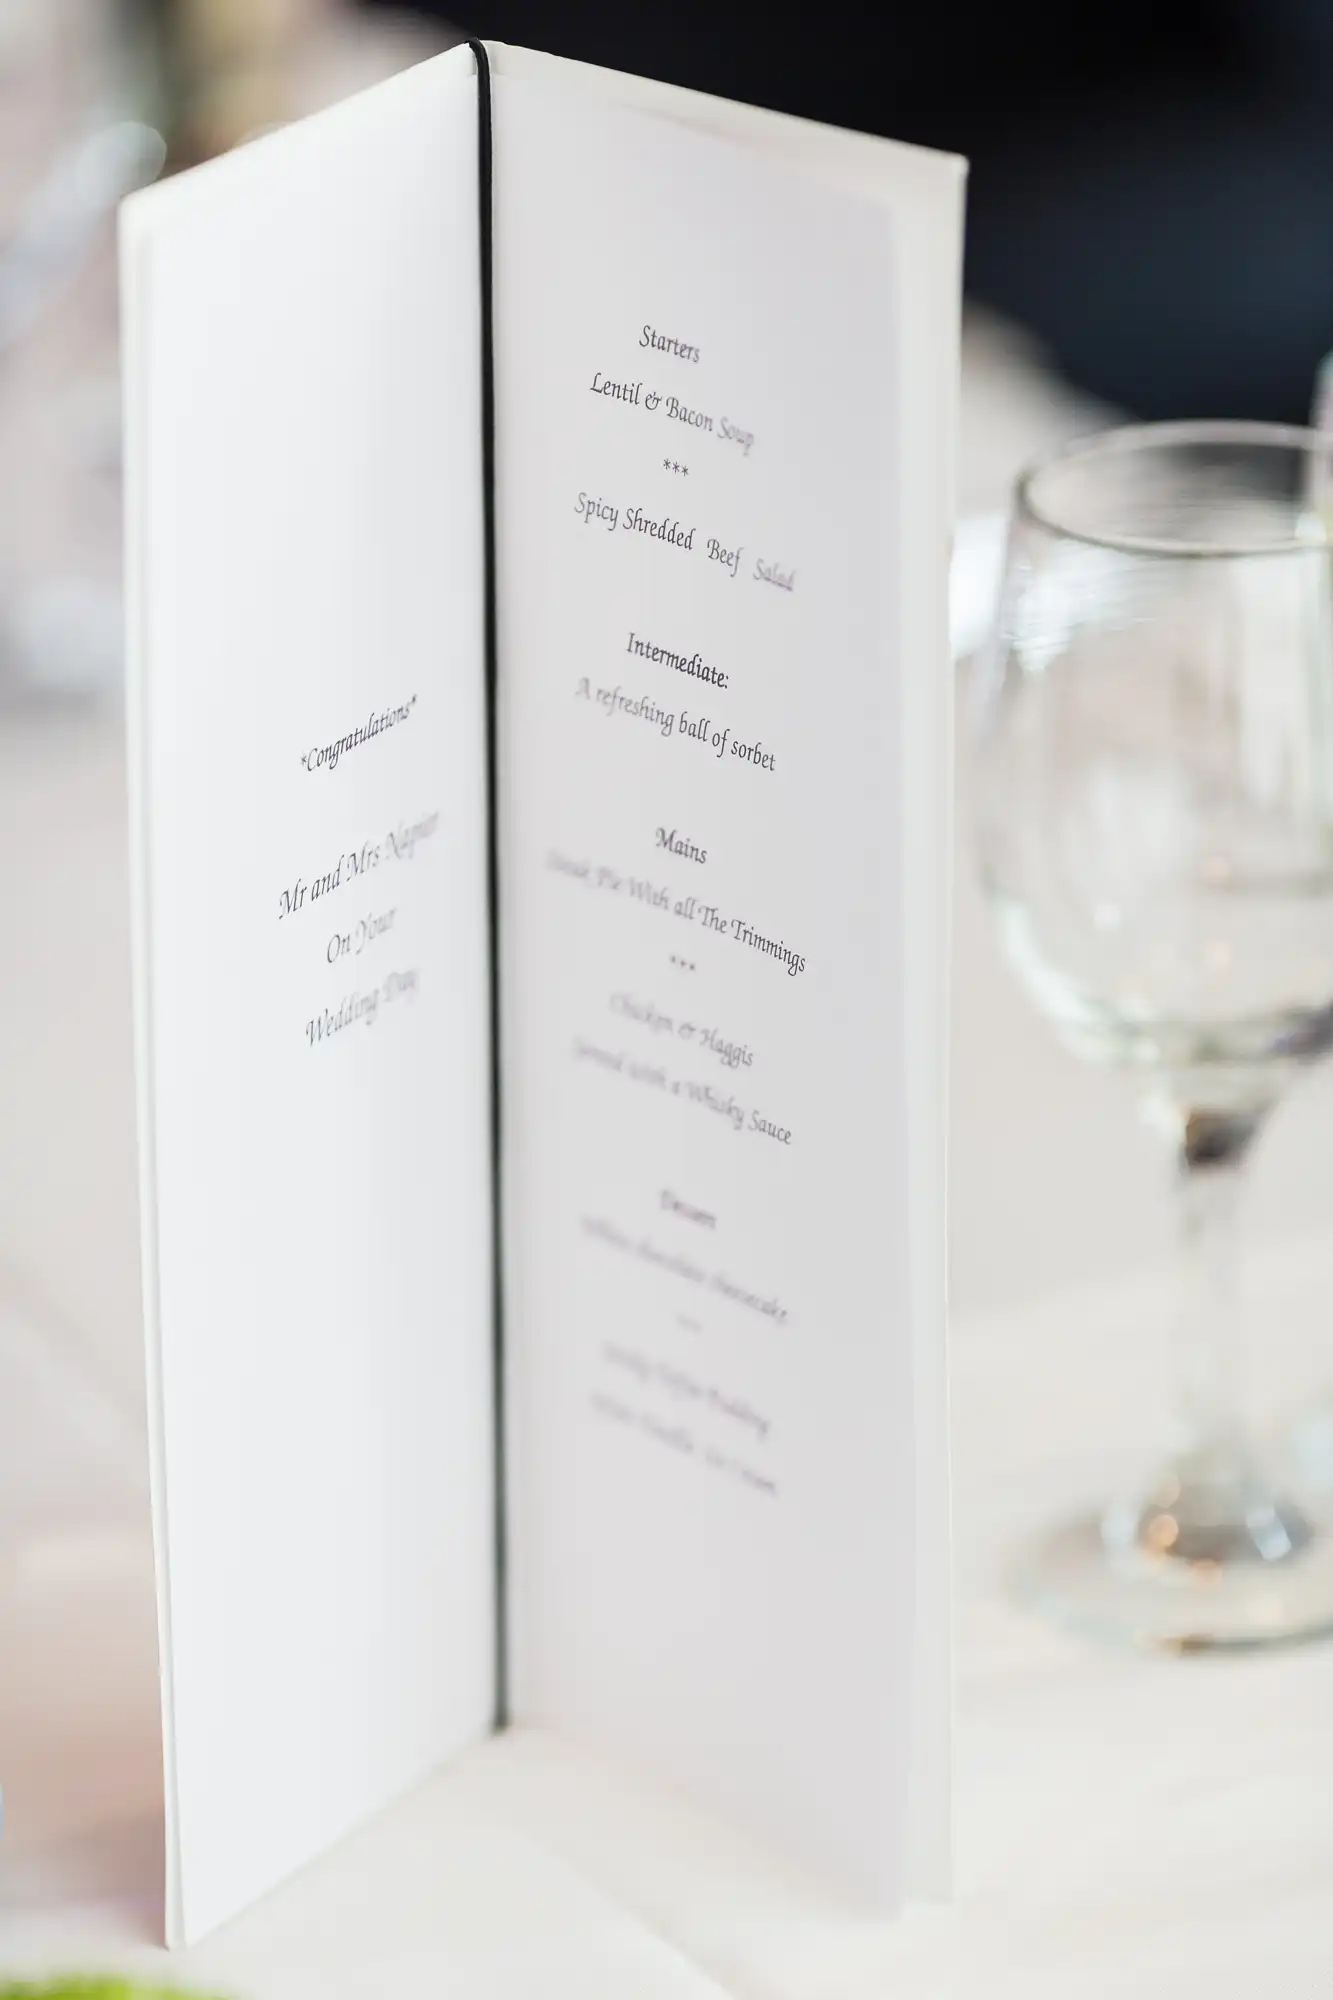 Open wedding menu displaying courses on a table with a blurred glass in the background.